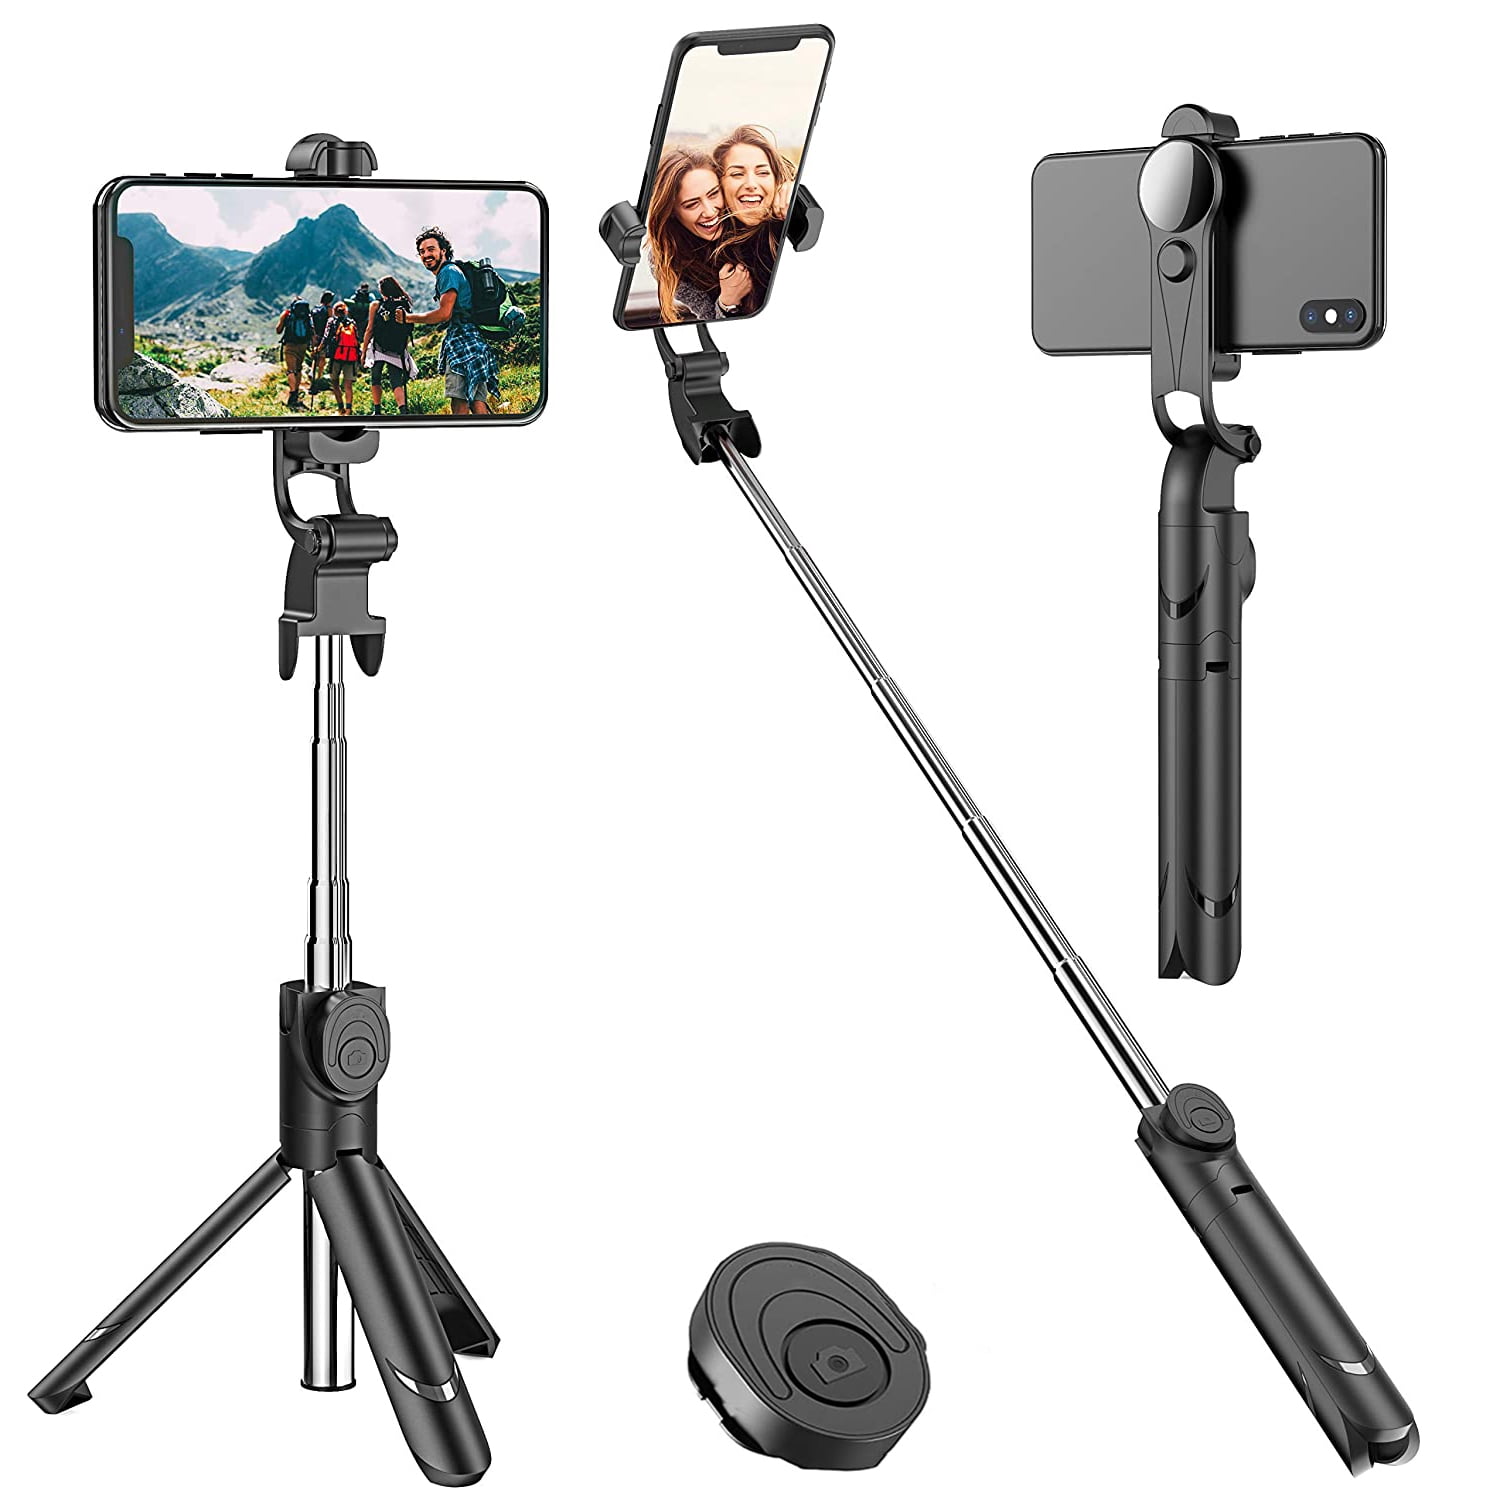 Wireless Tripod Selfie Stick for iPhone 14/14 Pro/Pro Max/13/13 Pro/Pro  Max/12 Pro/Pro Max/Pro Plus/Max Mini - Monopod Remote Shutter Built-in  Self-Portrait Extendable Stand J6A 